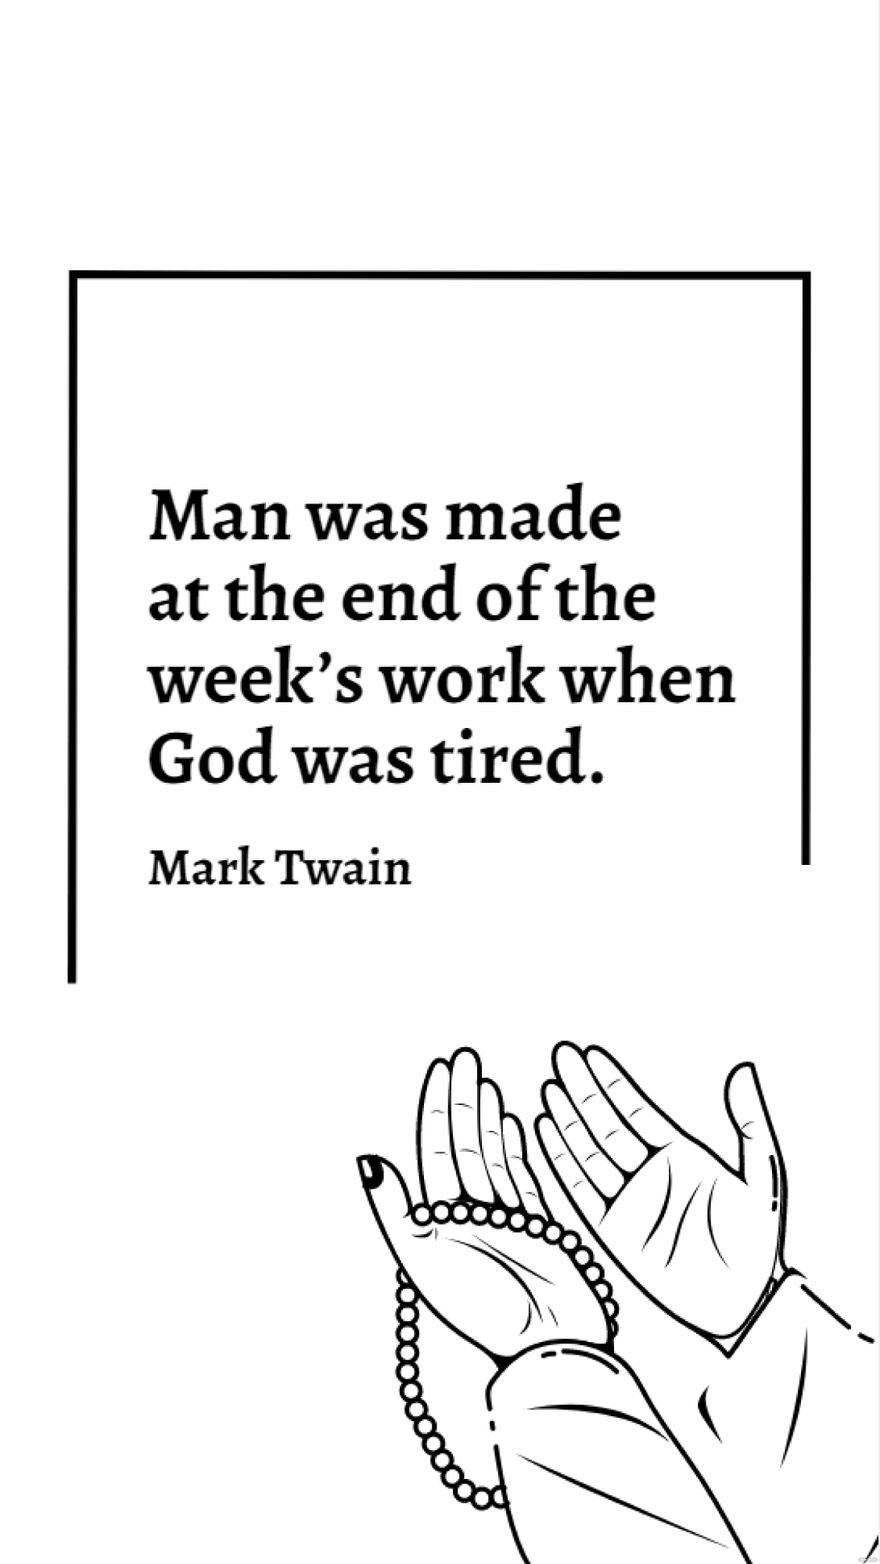 Mark Twain - Man was made at the end of the week’s work when God was tired. 